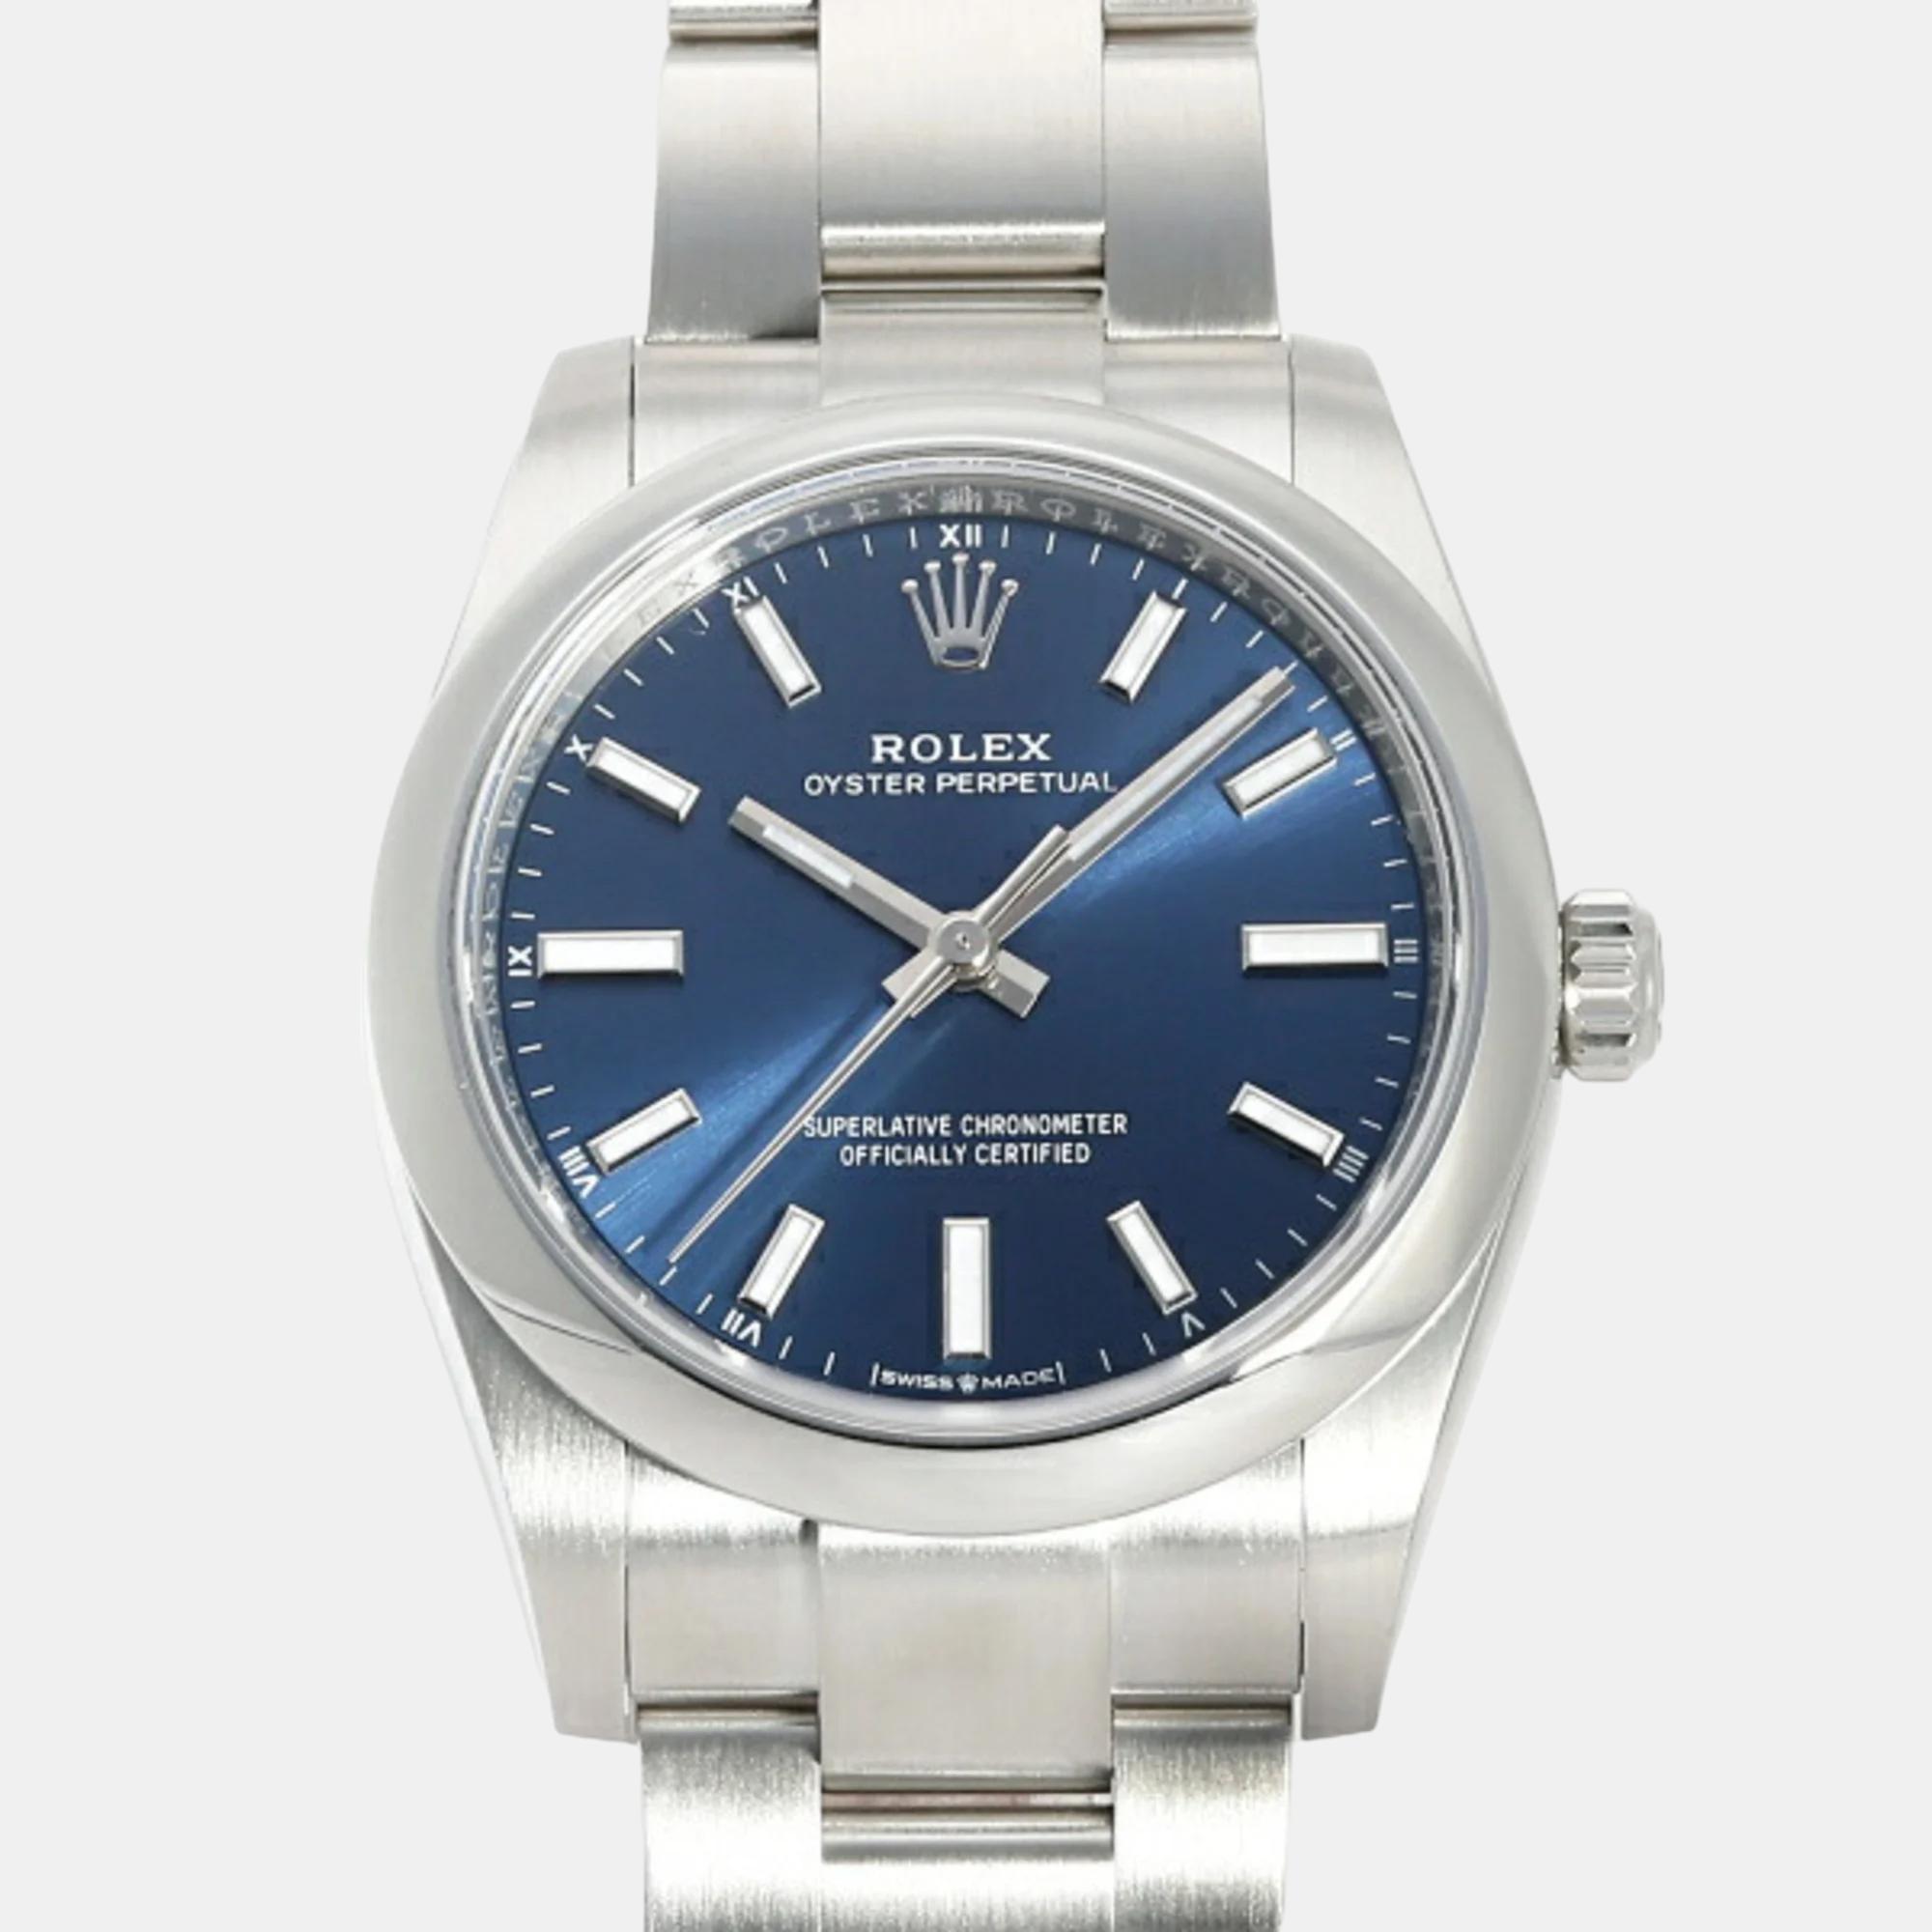 Rolex blue stainless steel oyster perpetual 124200 men's watch 34mm